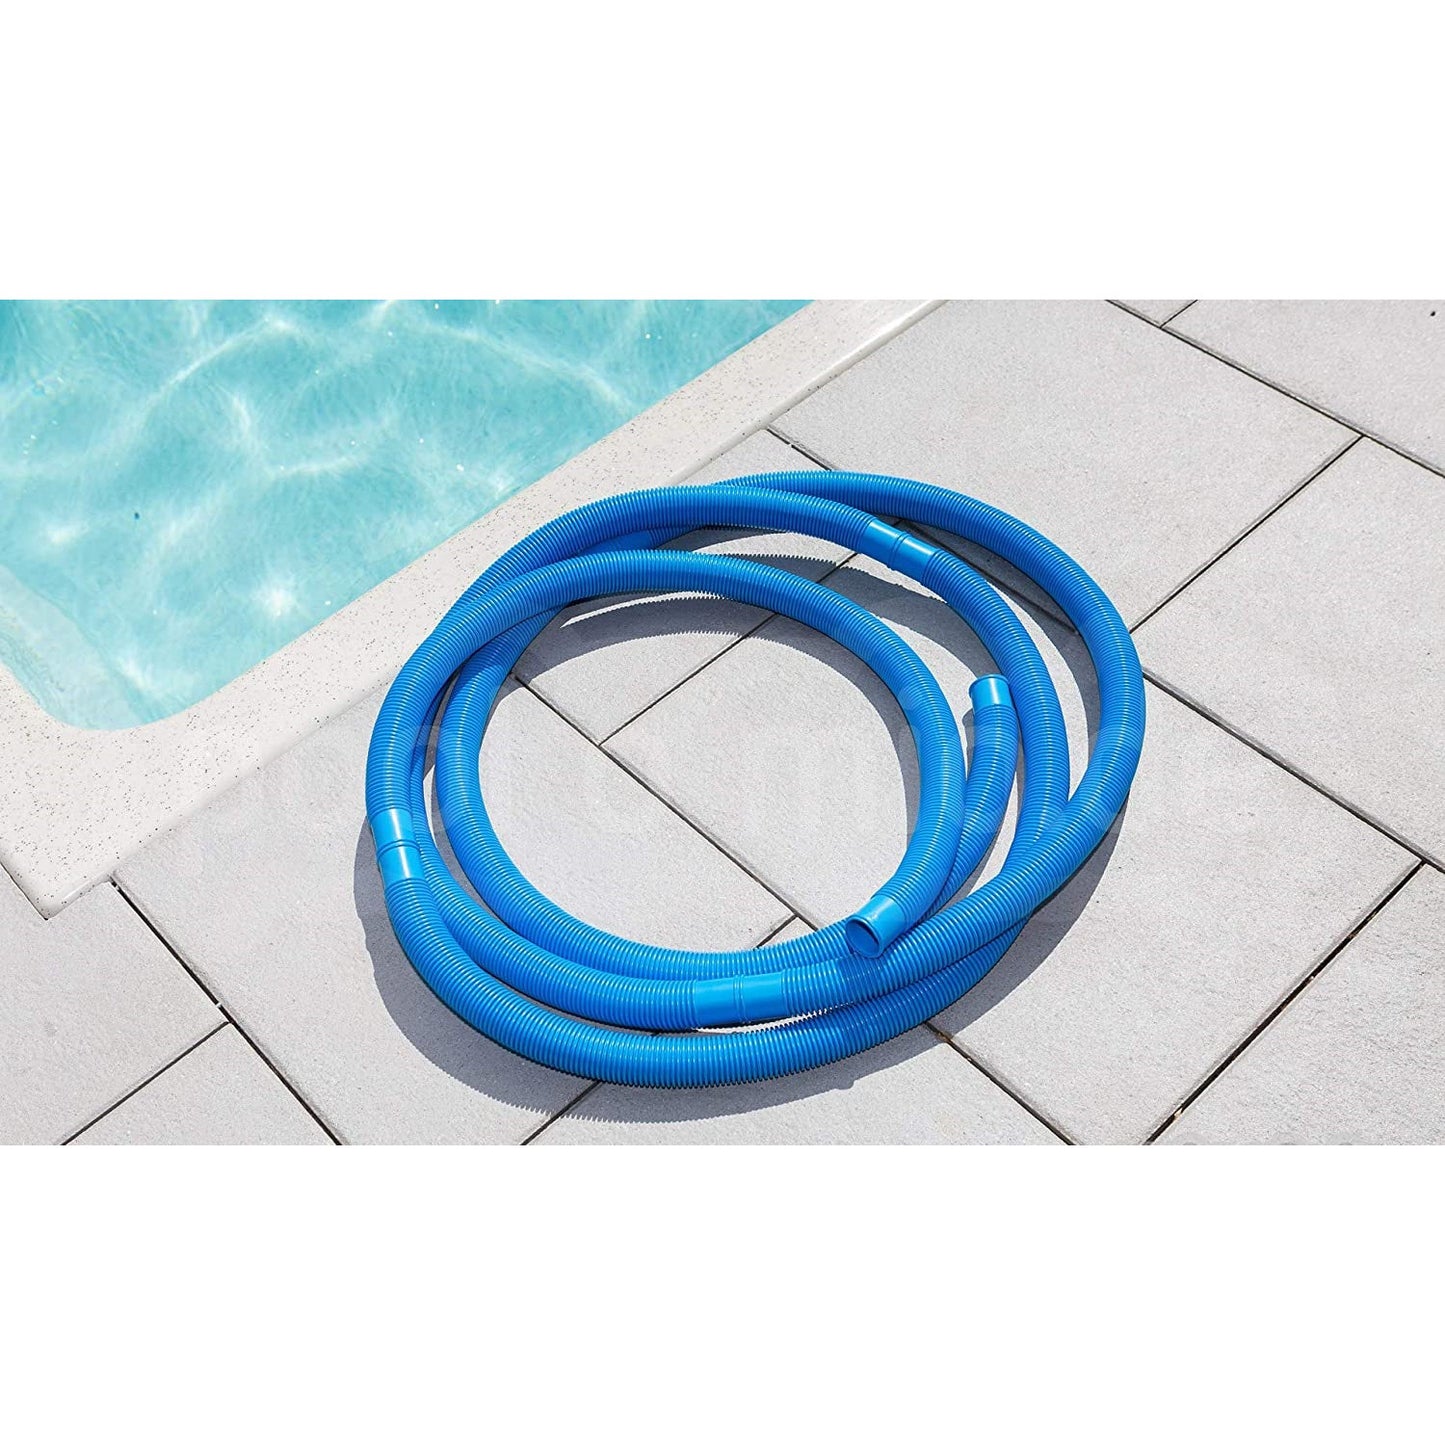 32 / 38 mm hose pipes